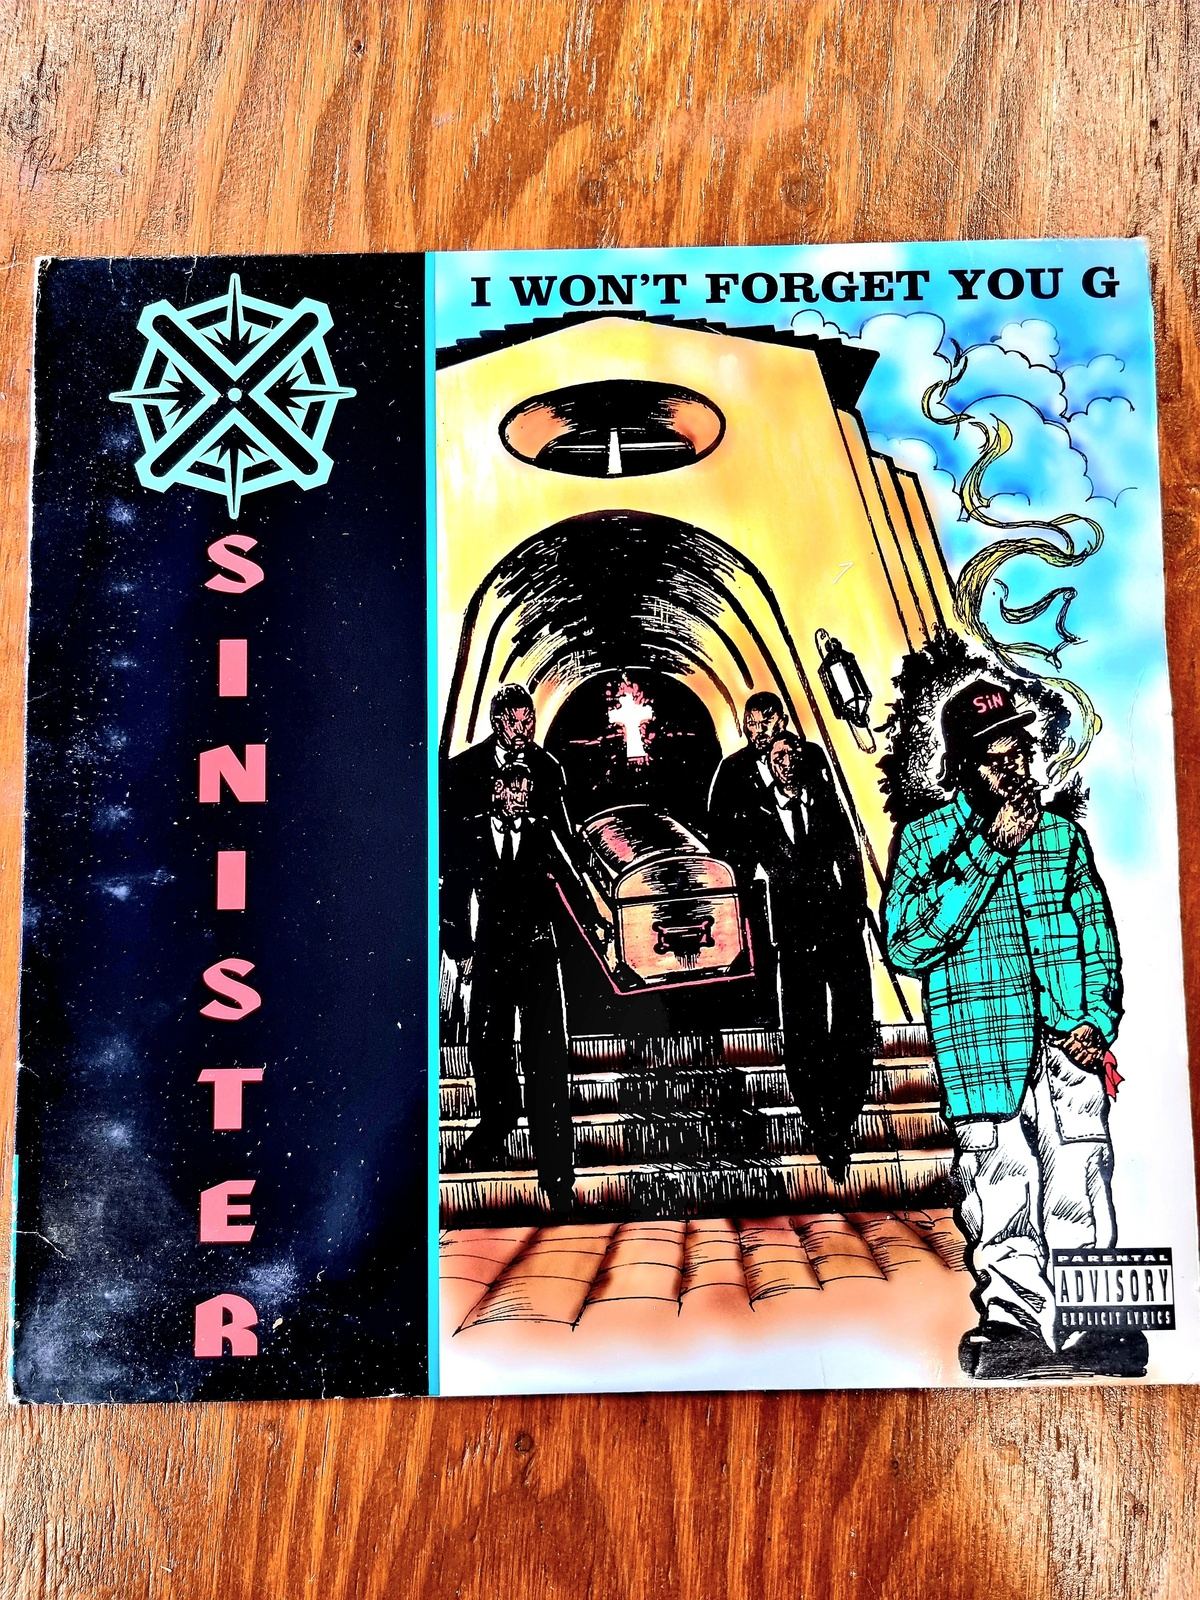 Sinister – I Won't Forget You G